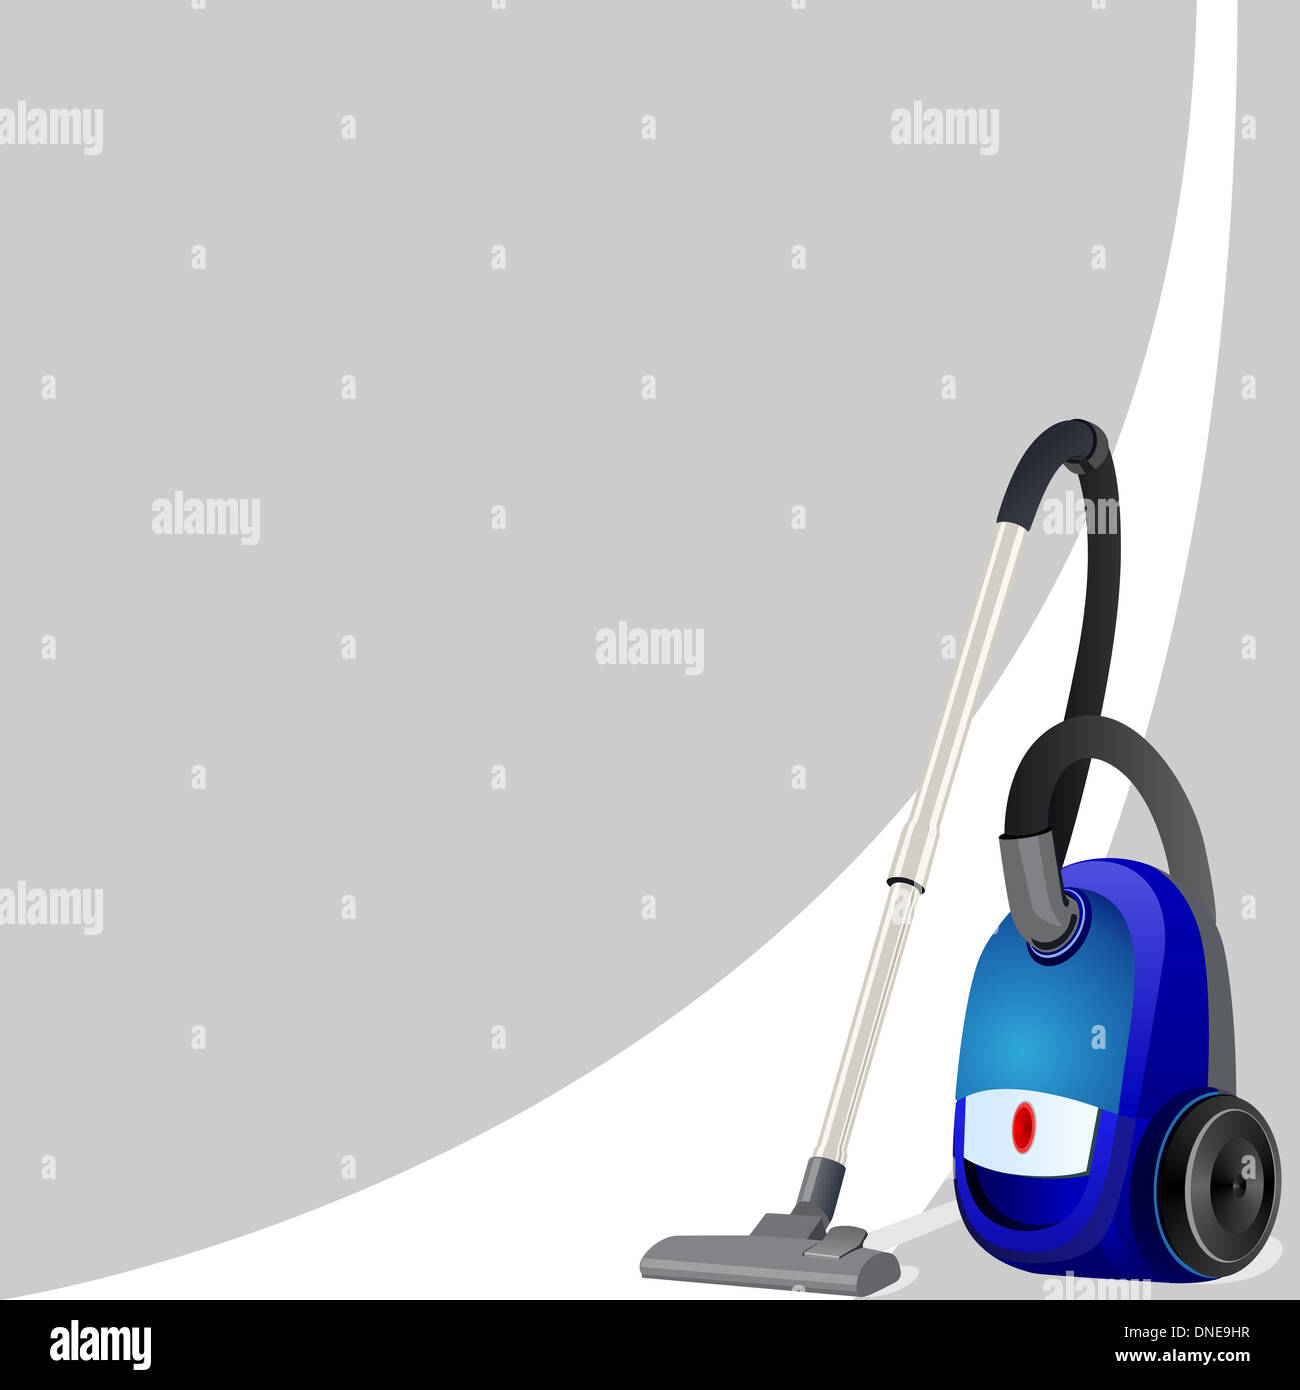 Vacuum cleaner for cleaning the premises of a white clean line. Illustration on an abstract gray background. Stock Photo